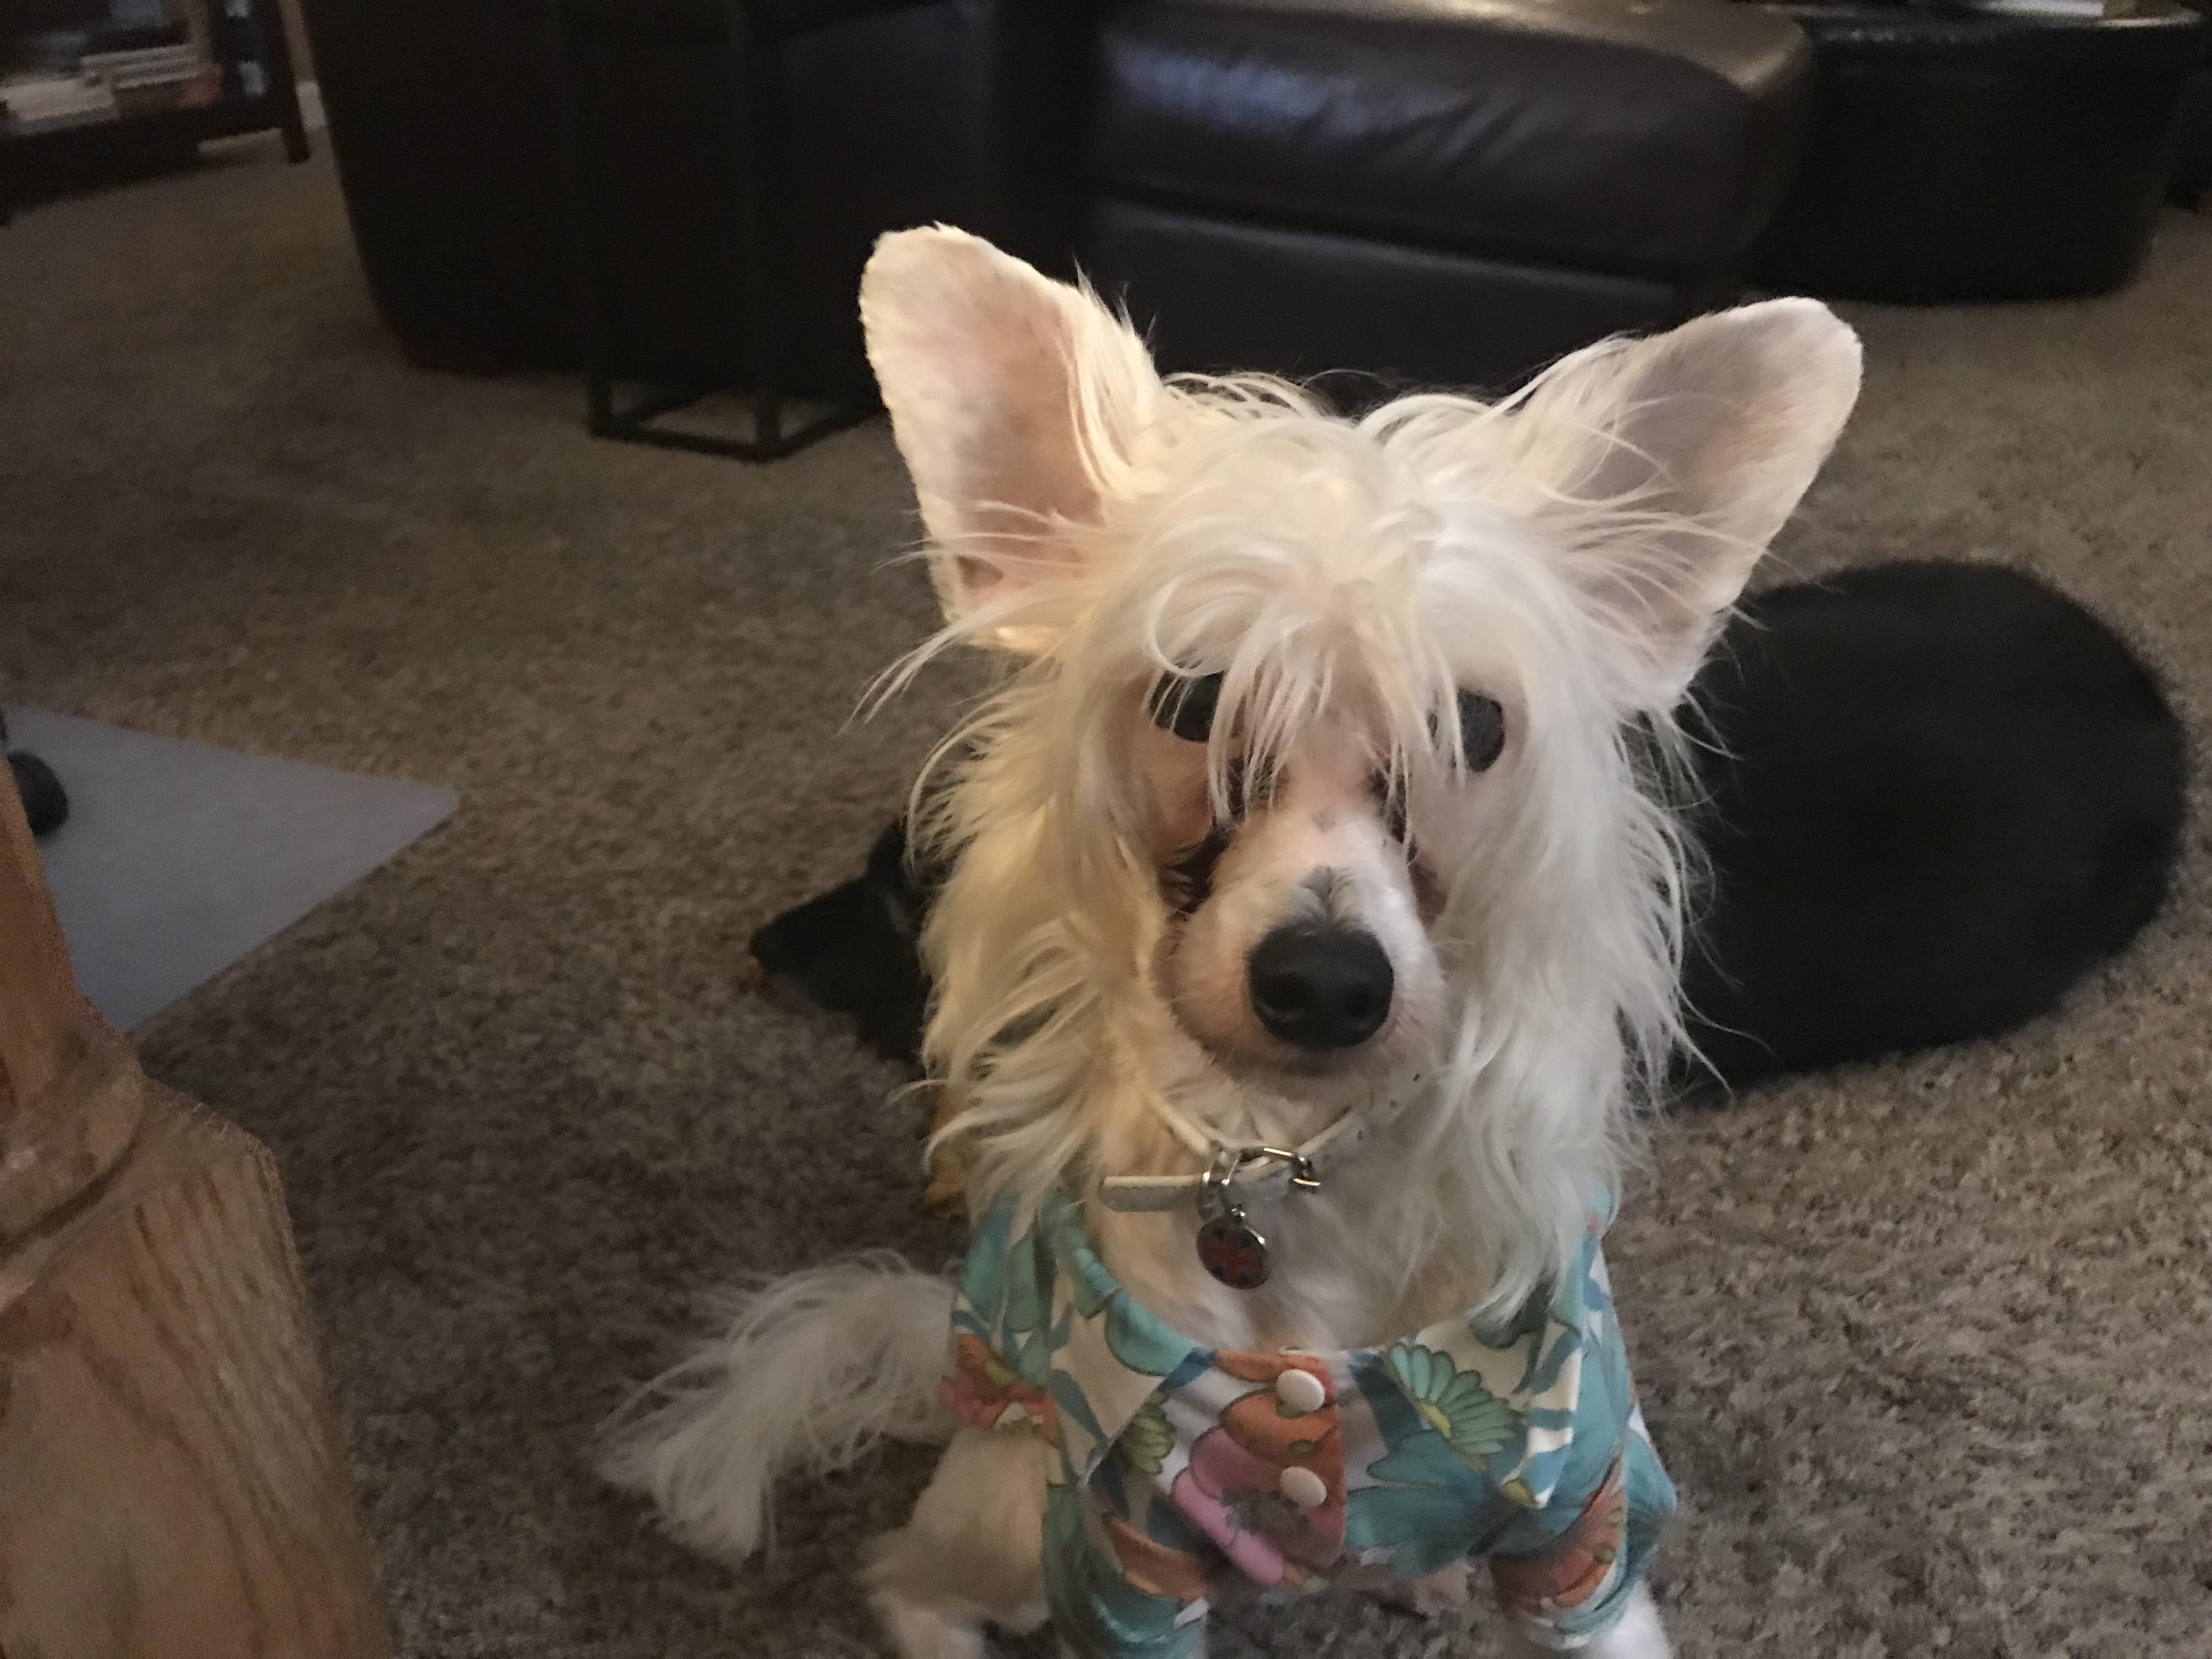 A Chinese Crested Dog wearing a shirt while sitting on the floor